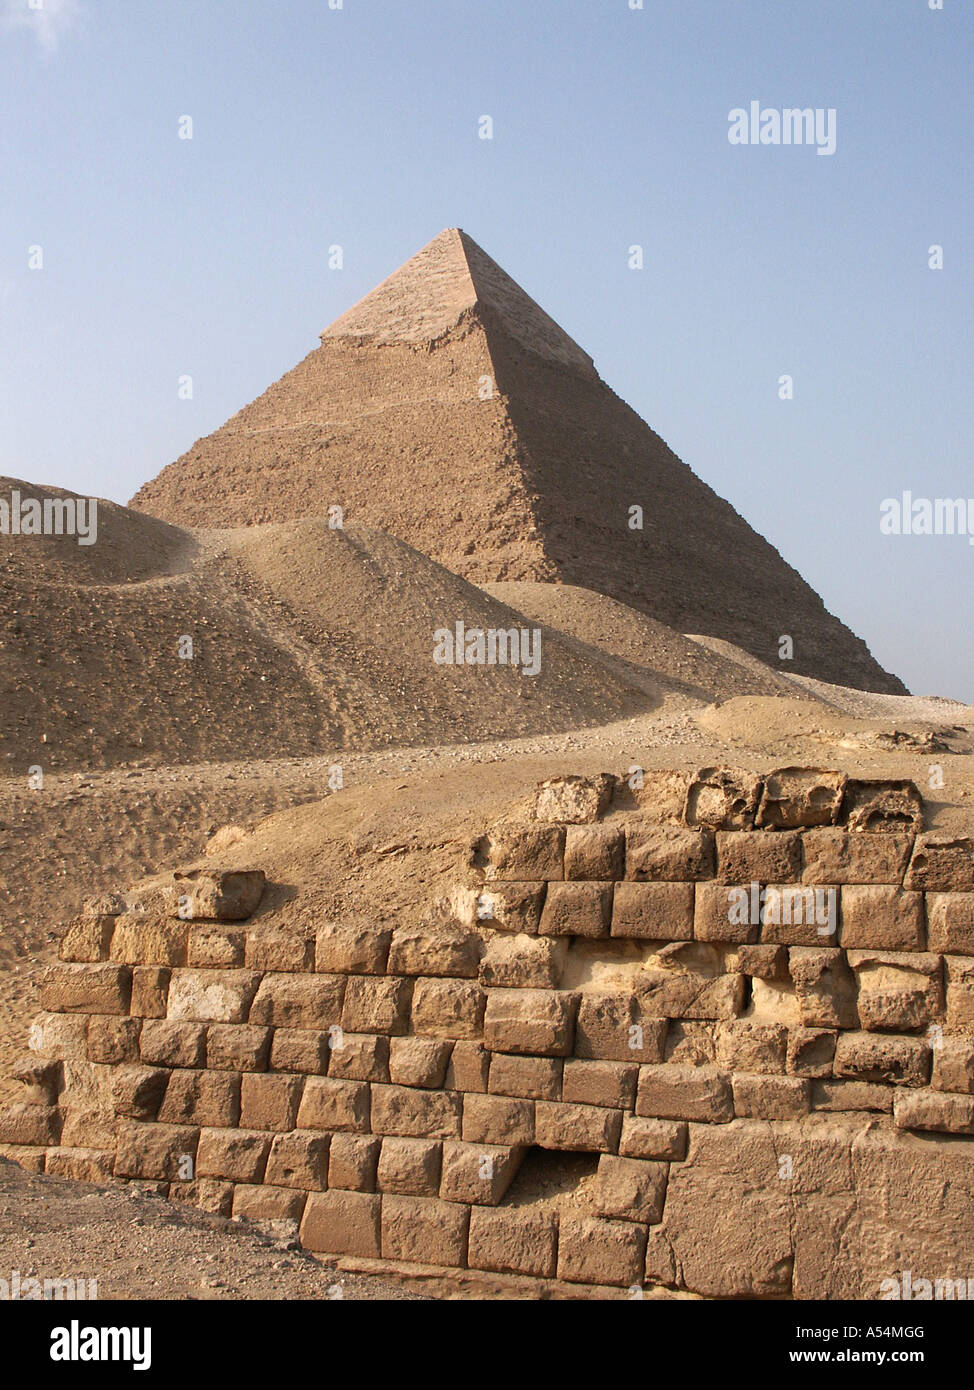 Painet ip1665 egypt pyramids giza 2002 country developing nation less economically developed culture emerging market Stock Photo